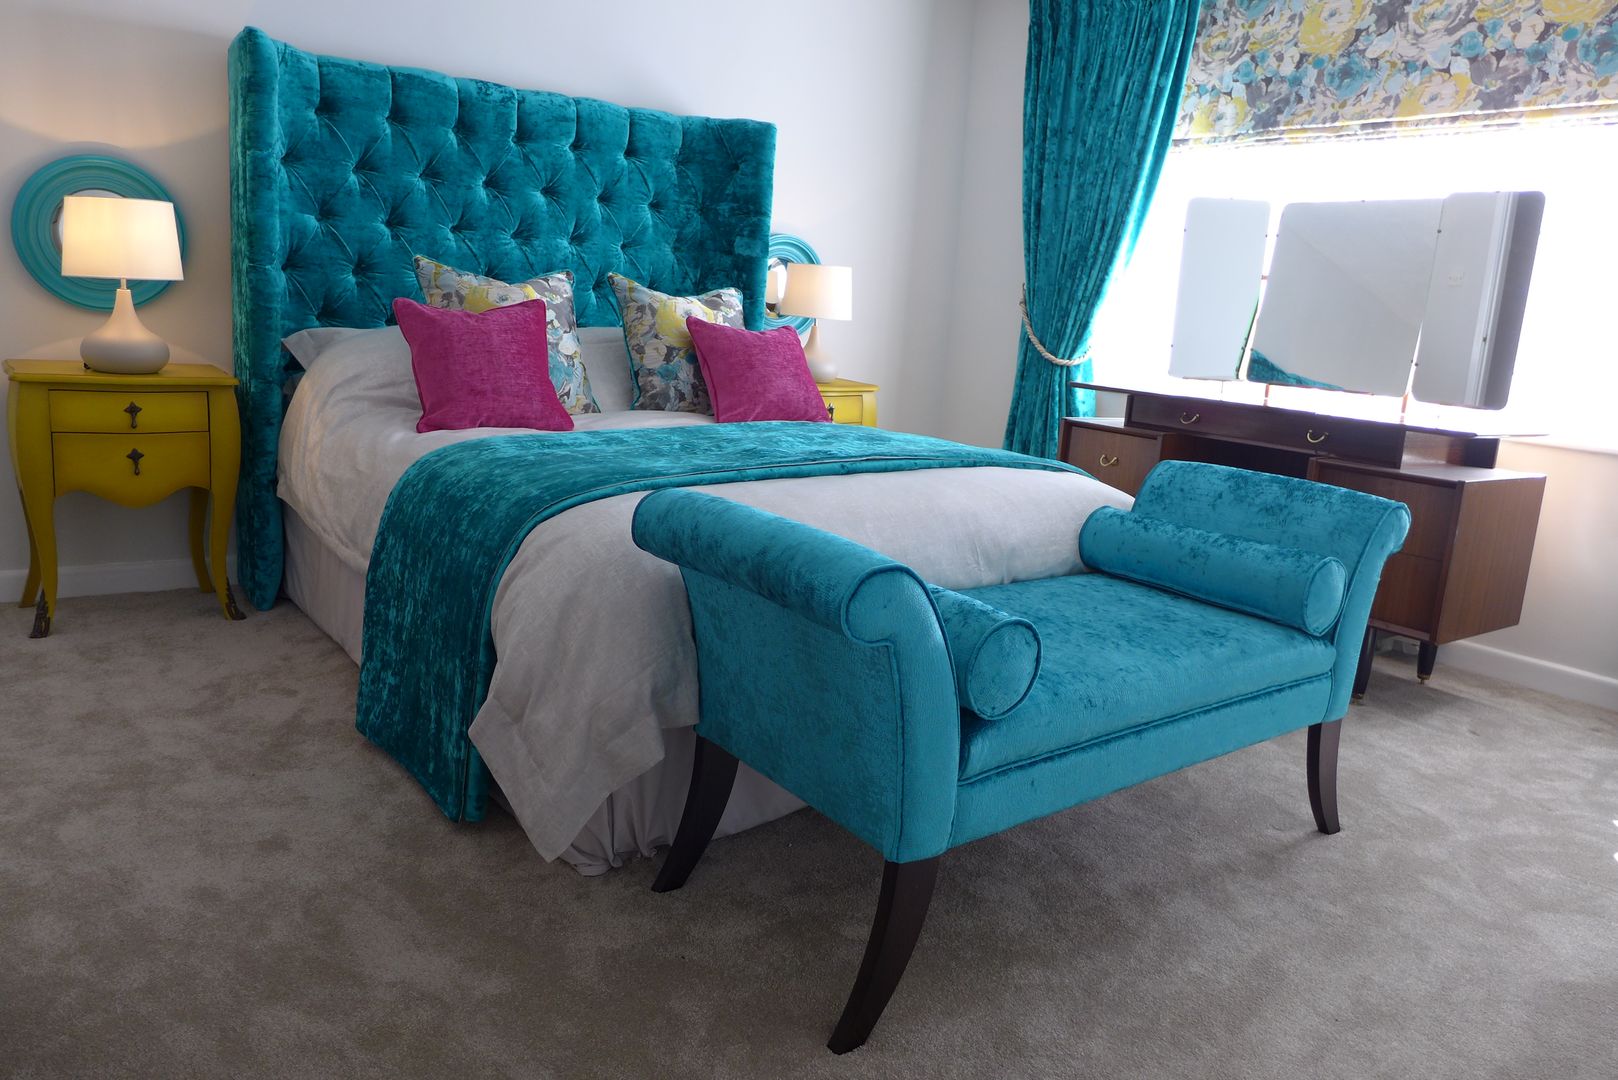 hotel style bedroom Style Within Klassische Schlafzimmer bed end chaise,blue velvet,dress curtains,roman blind,pink accents,velvet headboard,fabric headboard,boutique bedroom,hotel style bedroom